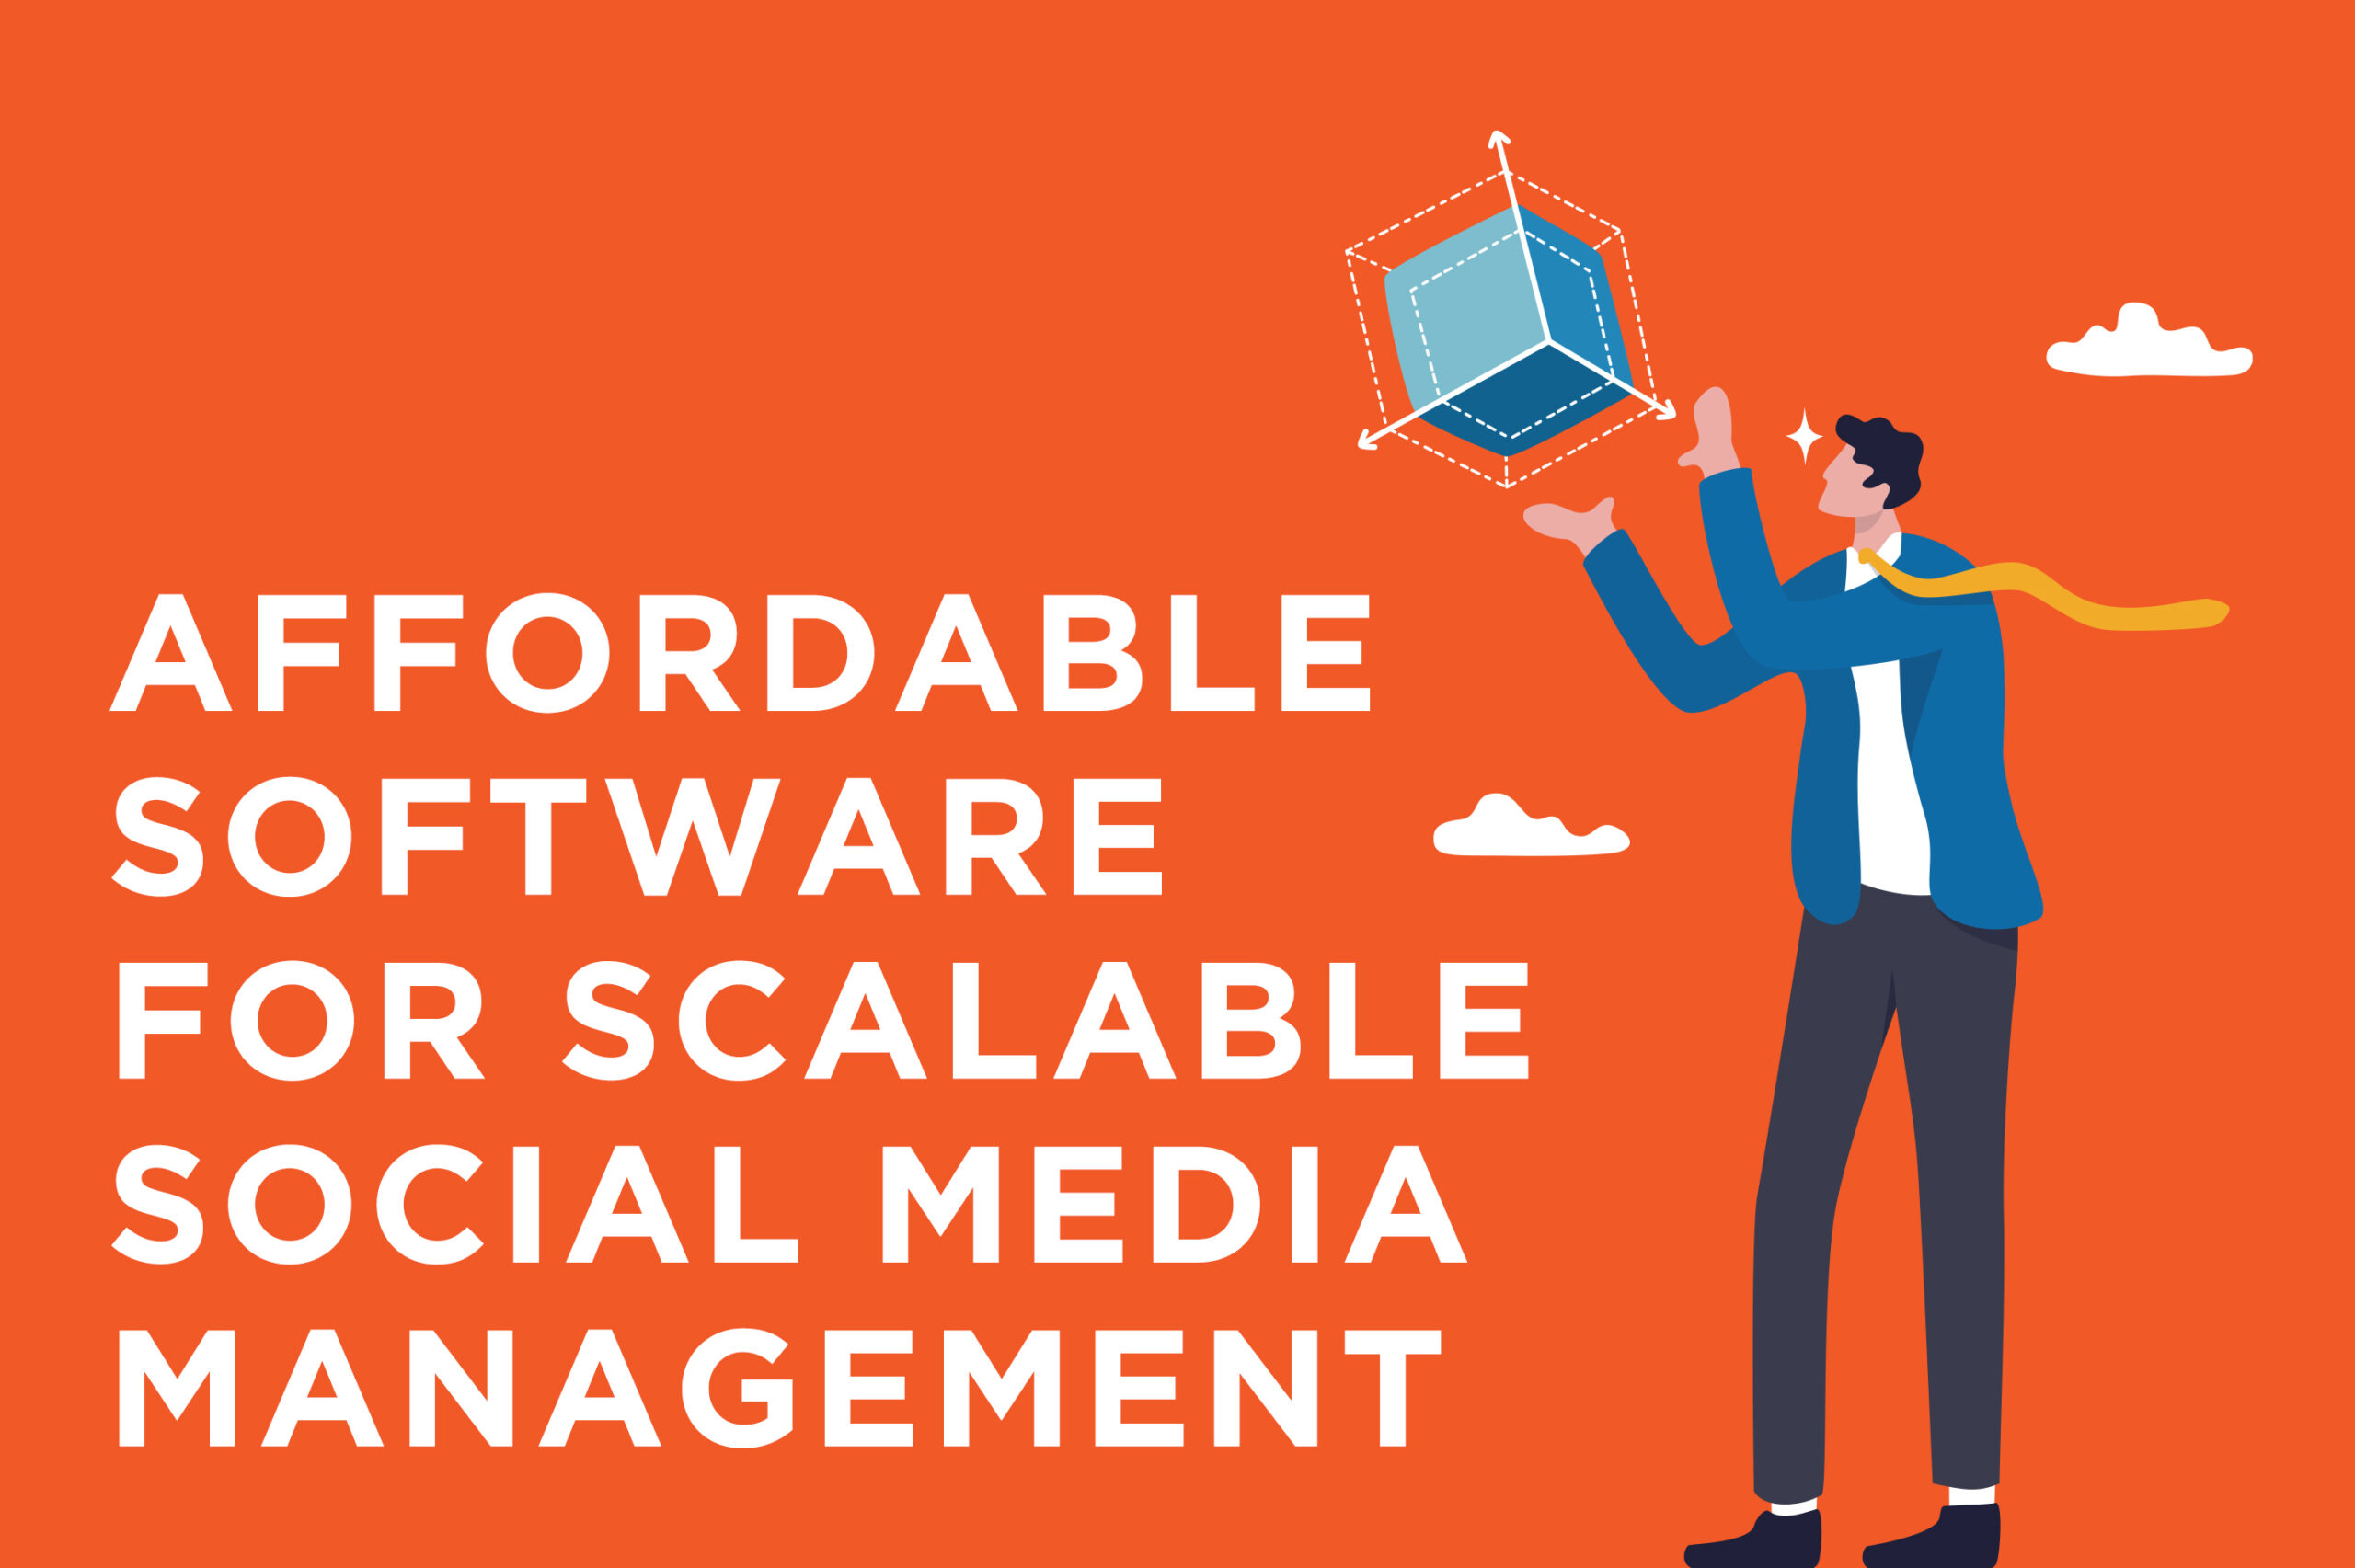 Affordable software for scalable social media management